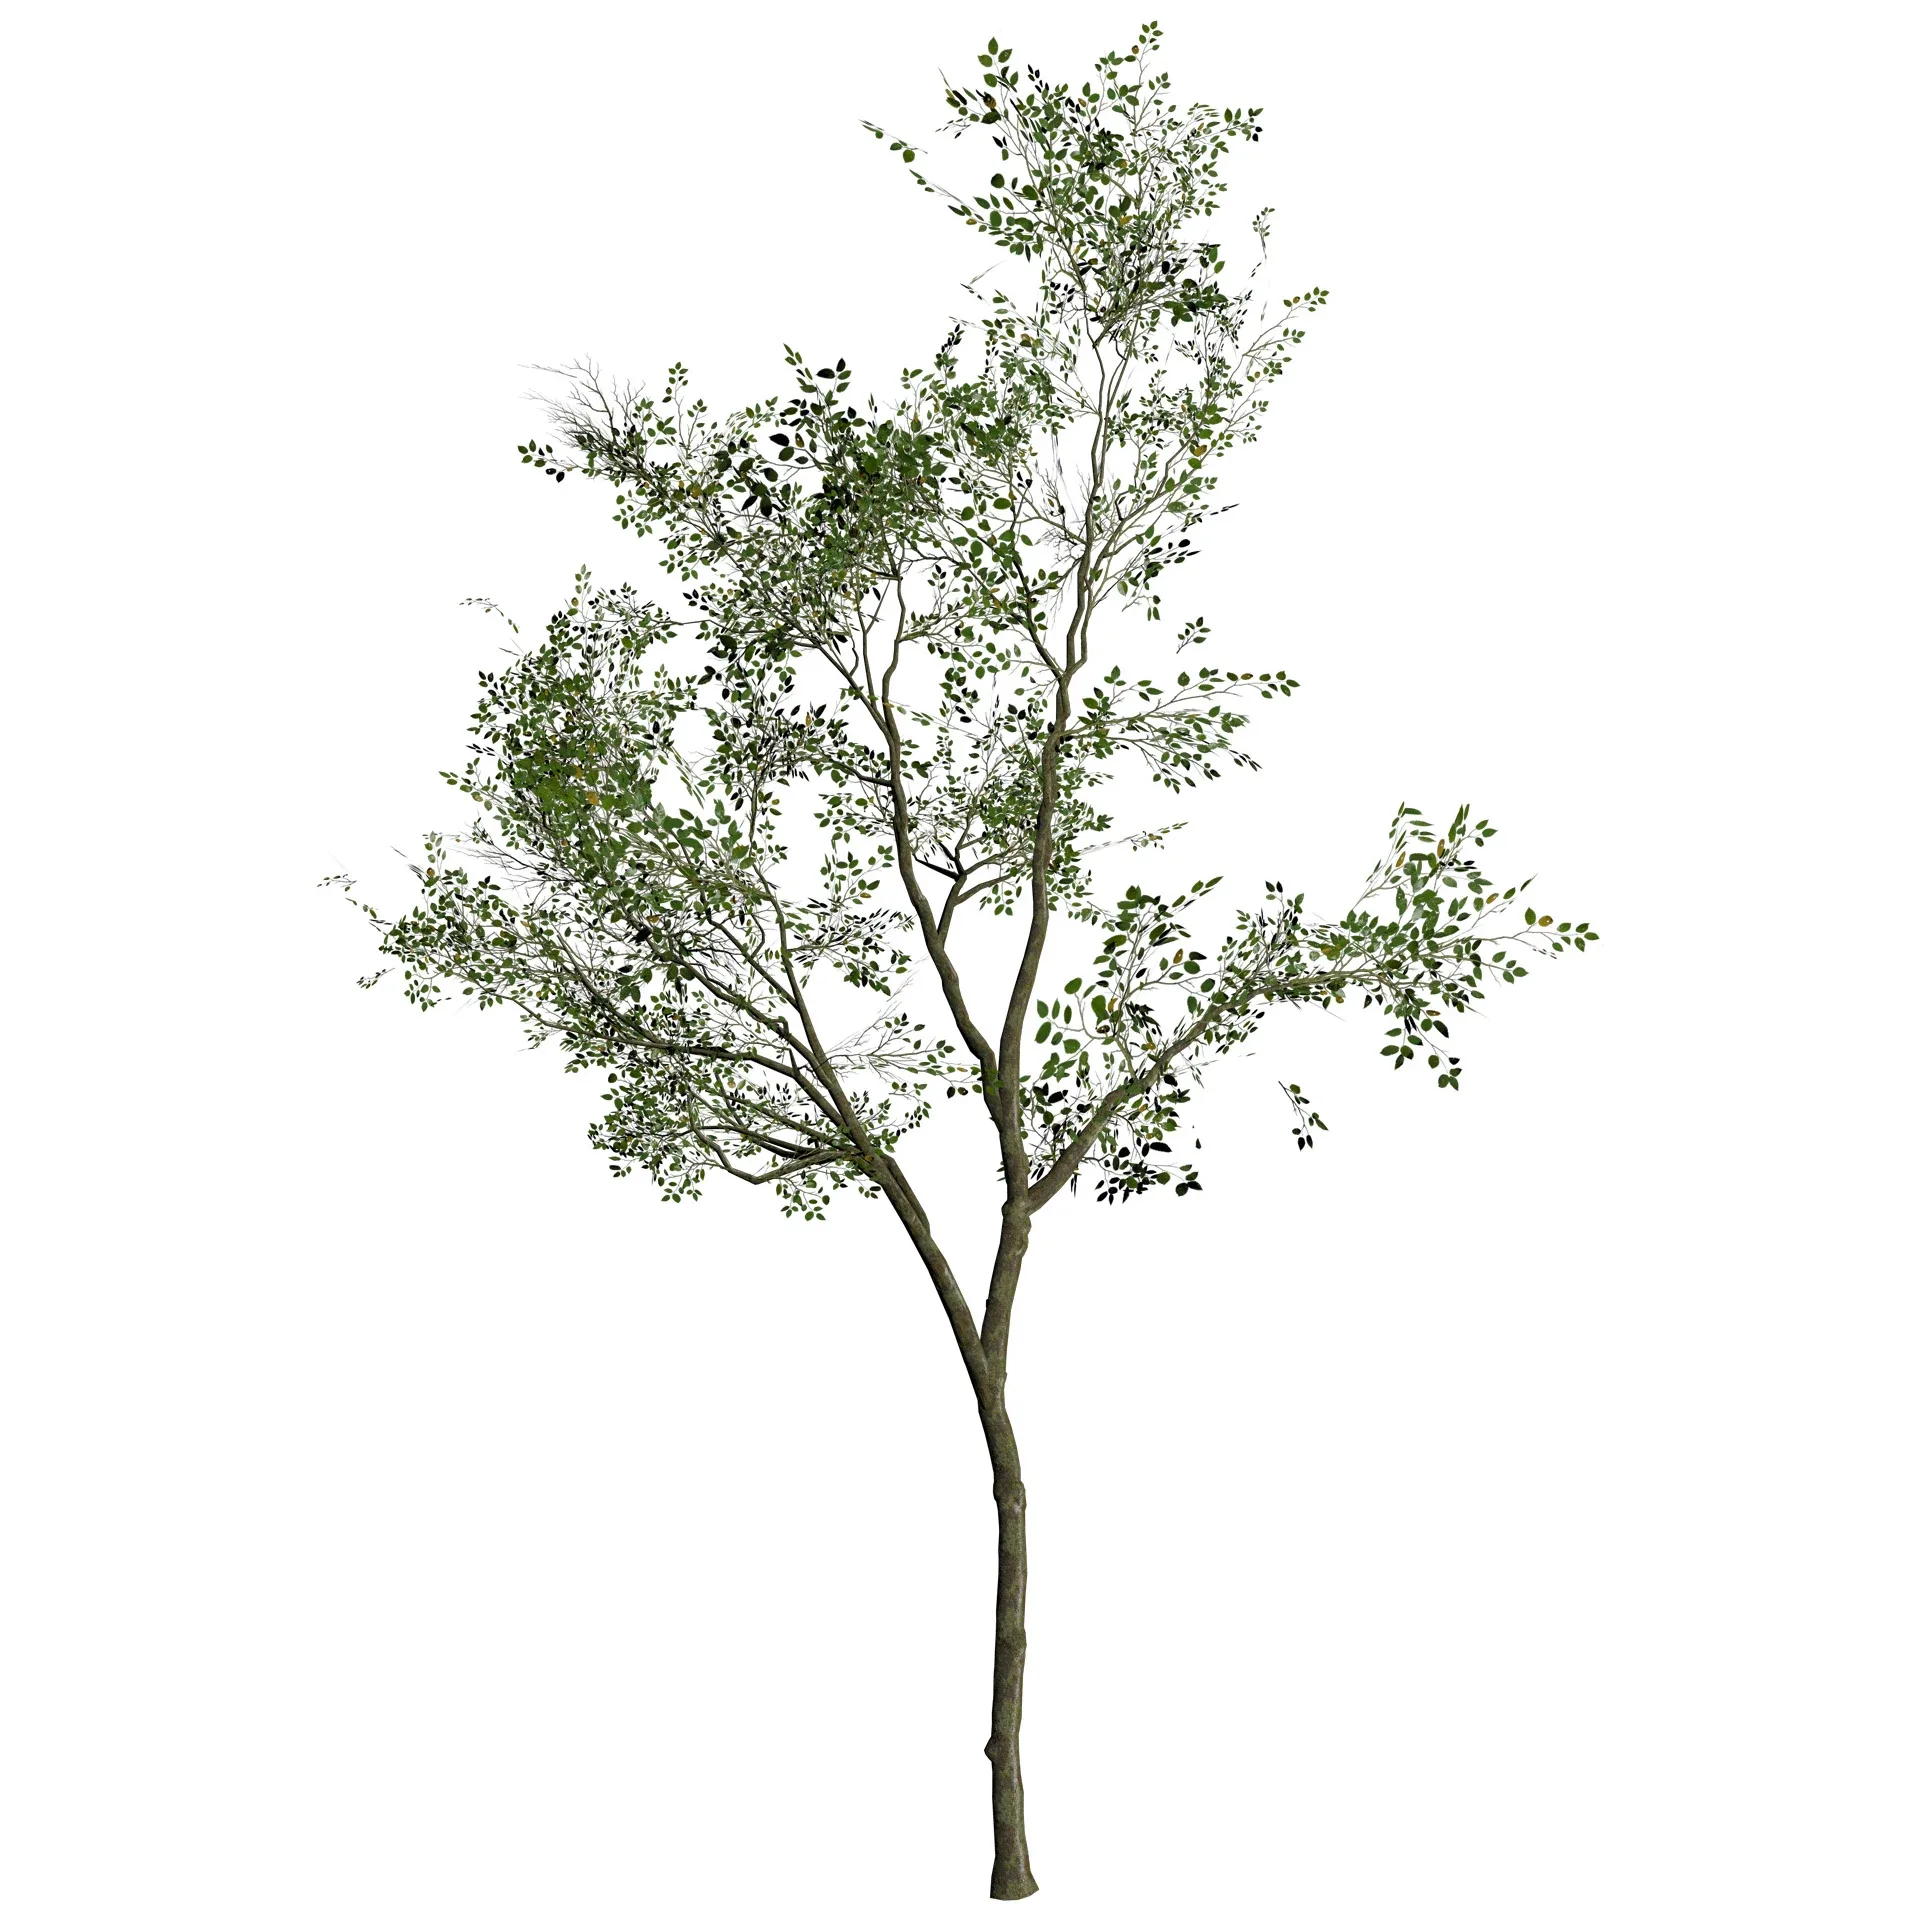 Realistic Silver Birch Tree 3D Model for game and Landscape Design